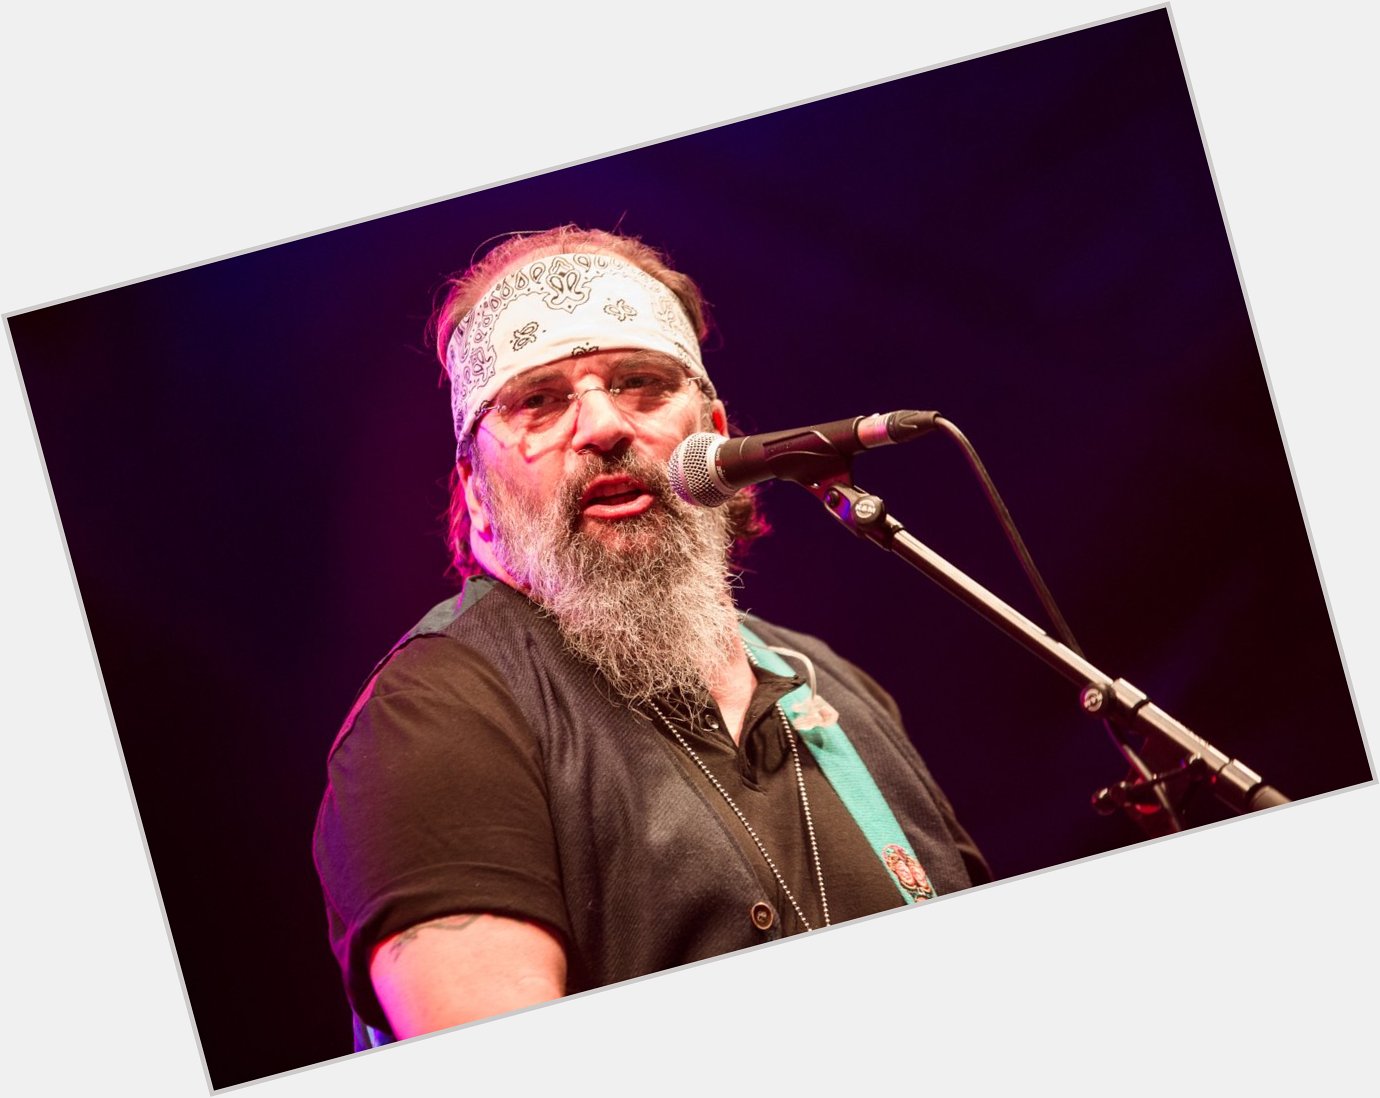 Please join me here at in wishing the one and only Steve Earle a very Happy 66th Birthday today  